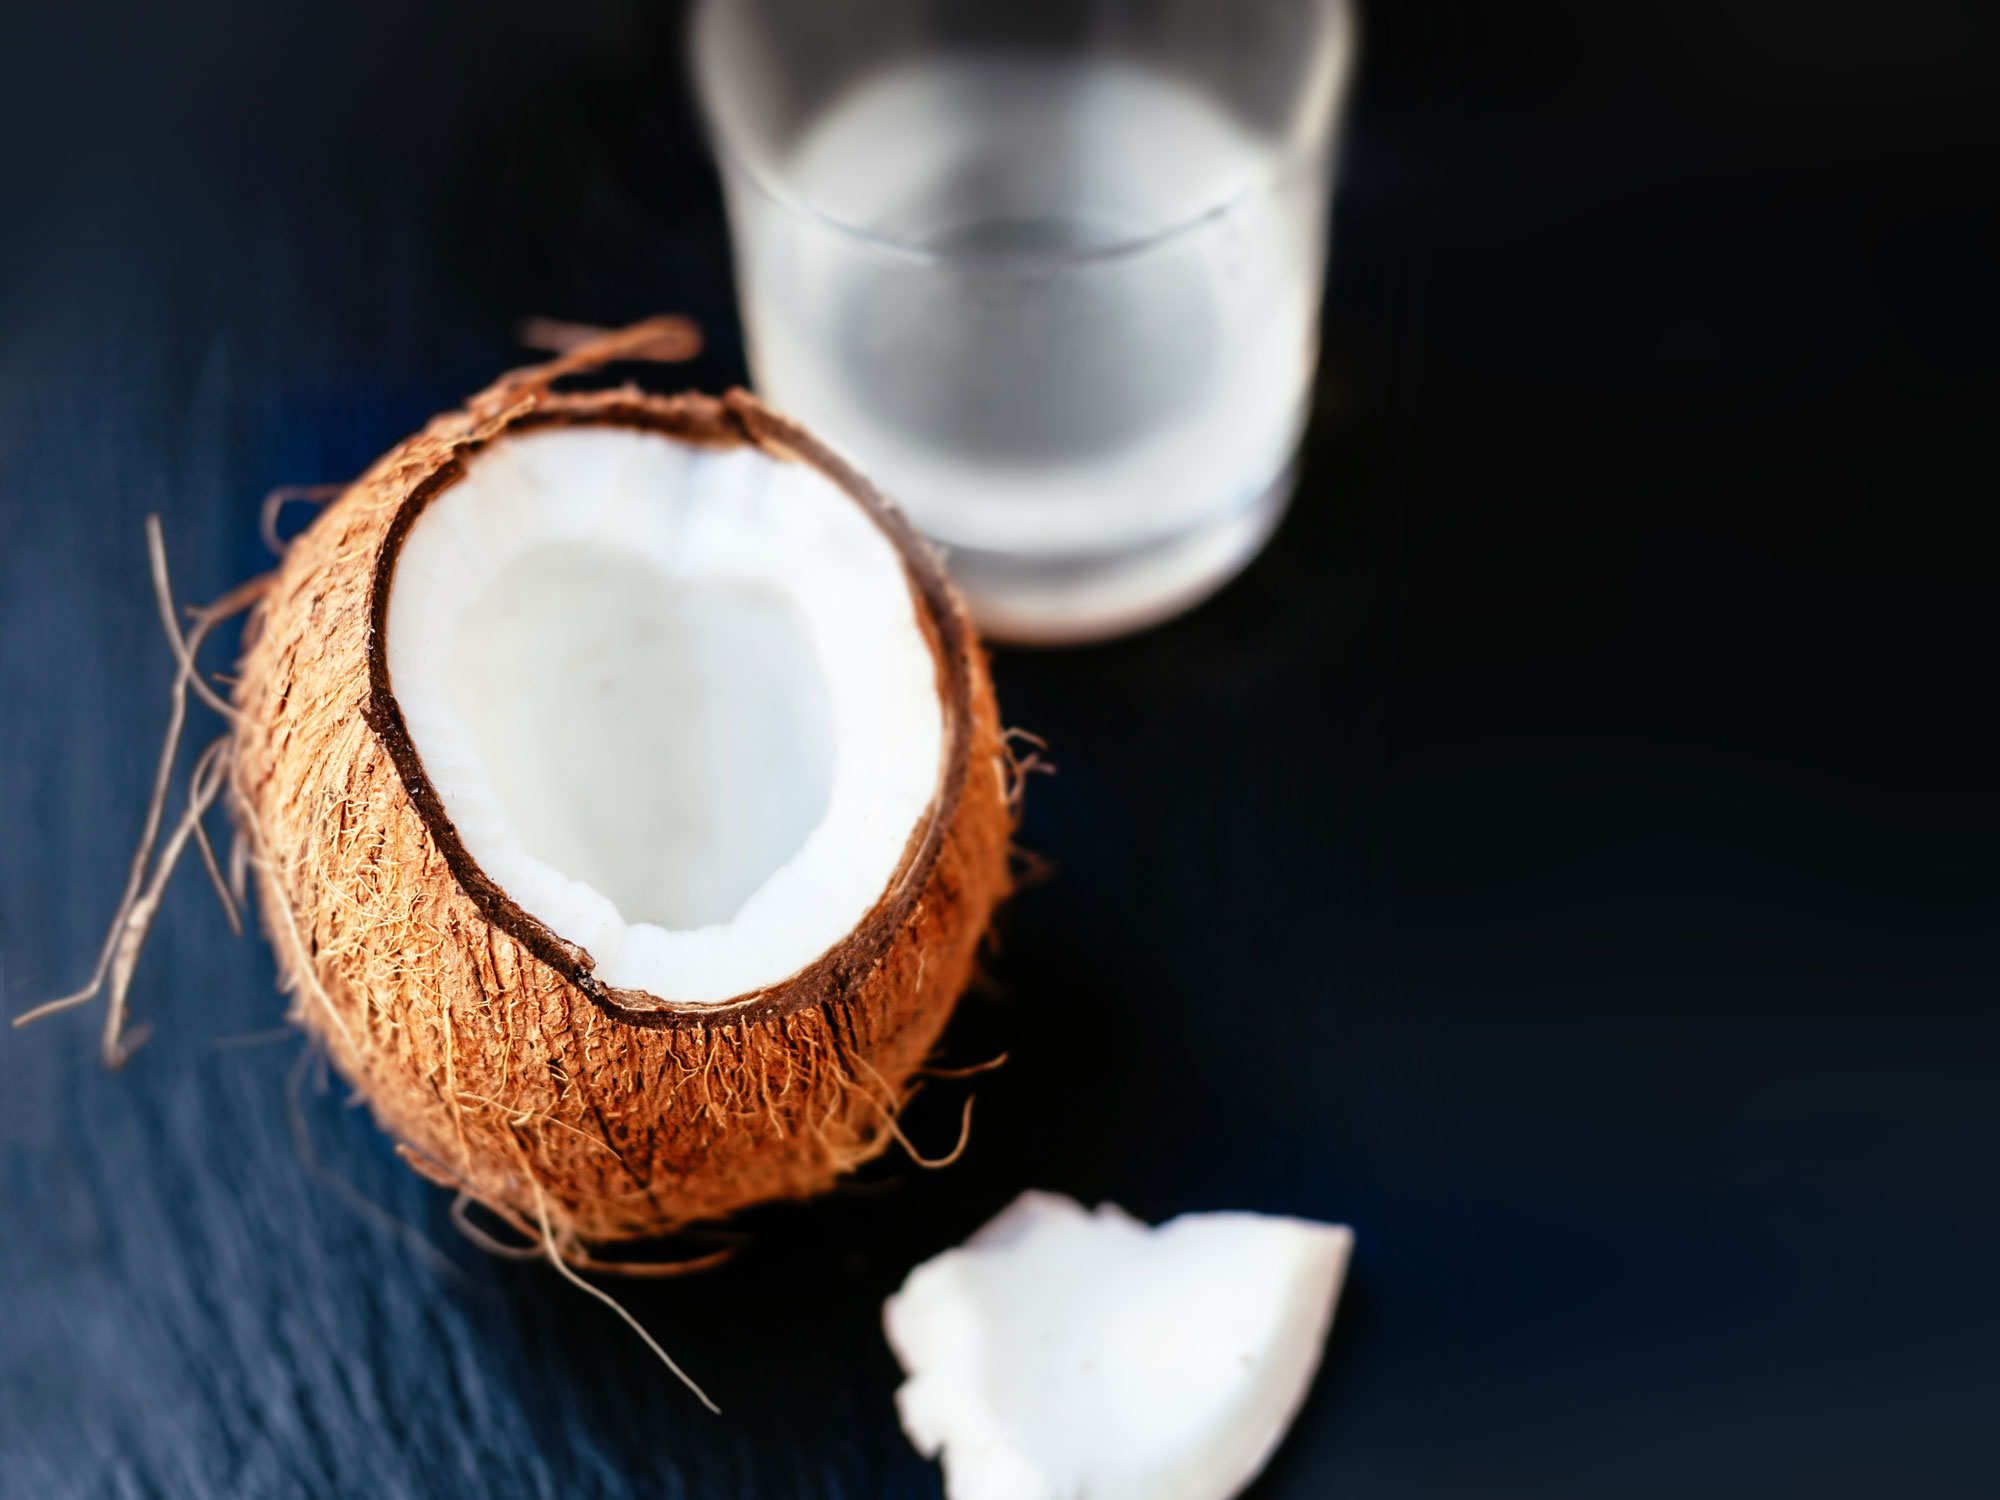 The secrets behind the war on coconut oil